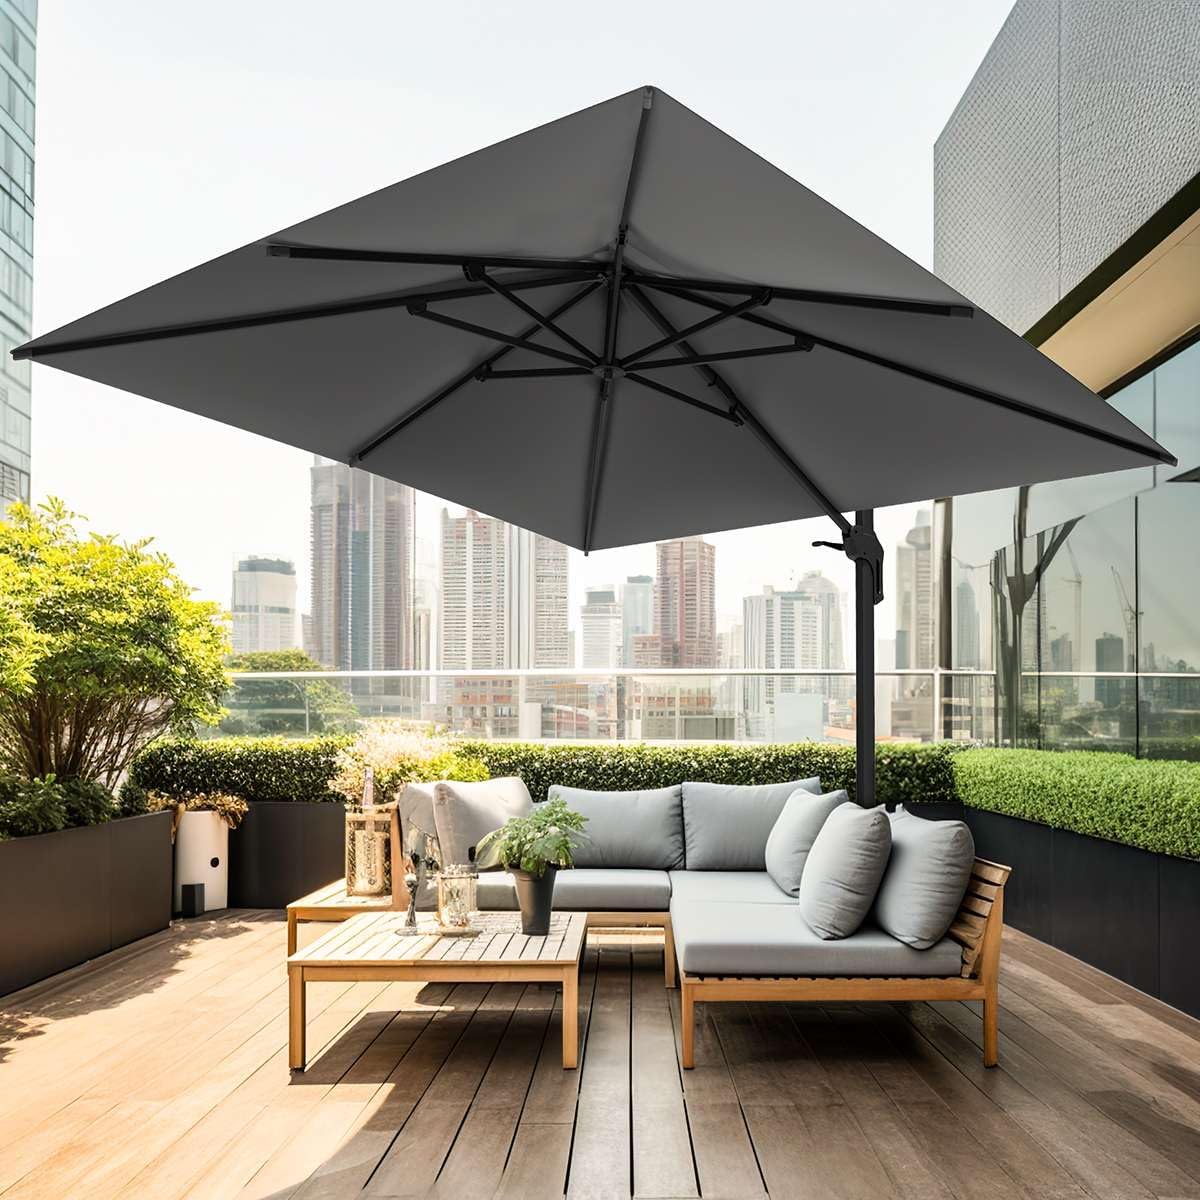 wikiwiki 11x11 FT Cantilever Patio Umbrella Outdoor Large Offset Square Umbrella w/ 36 Month Fade Resistance Recycled Fabric, 6-Level 360Rotation Aluminum Pole for Deck Pool, Grey